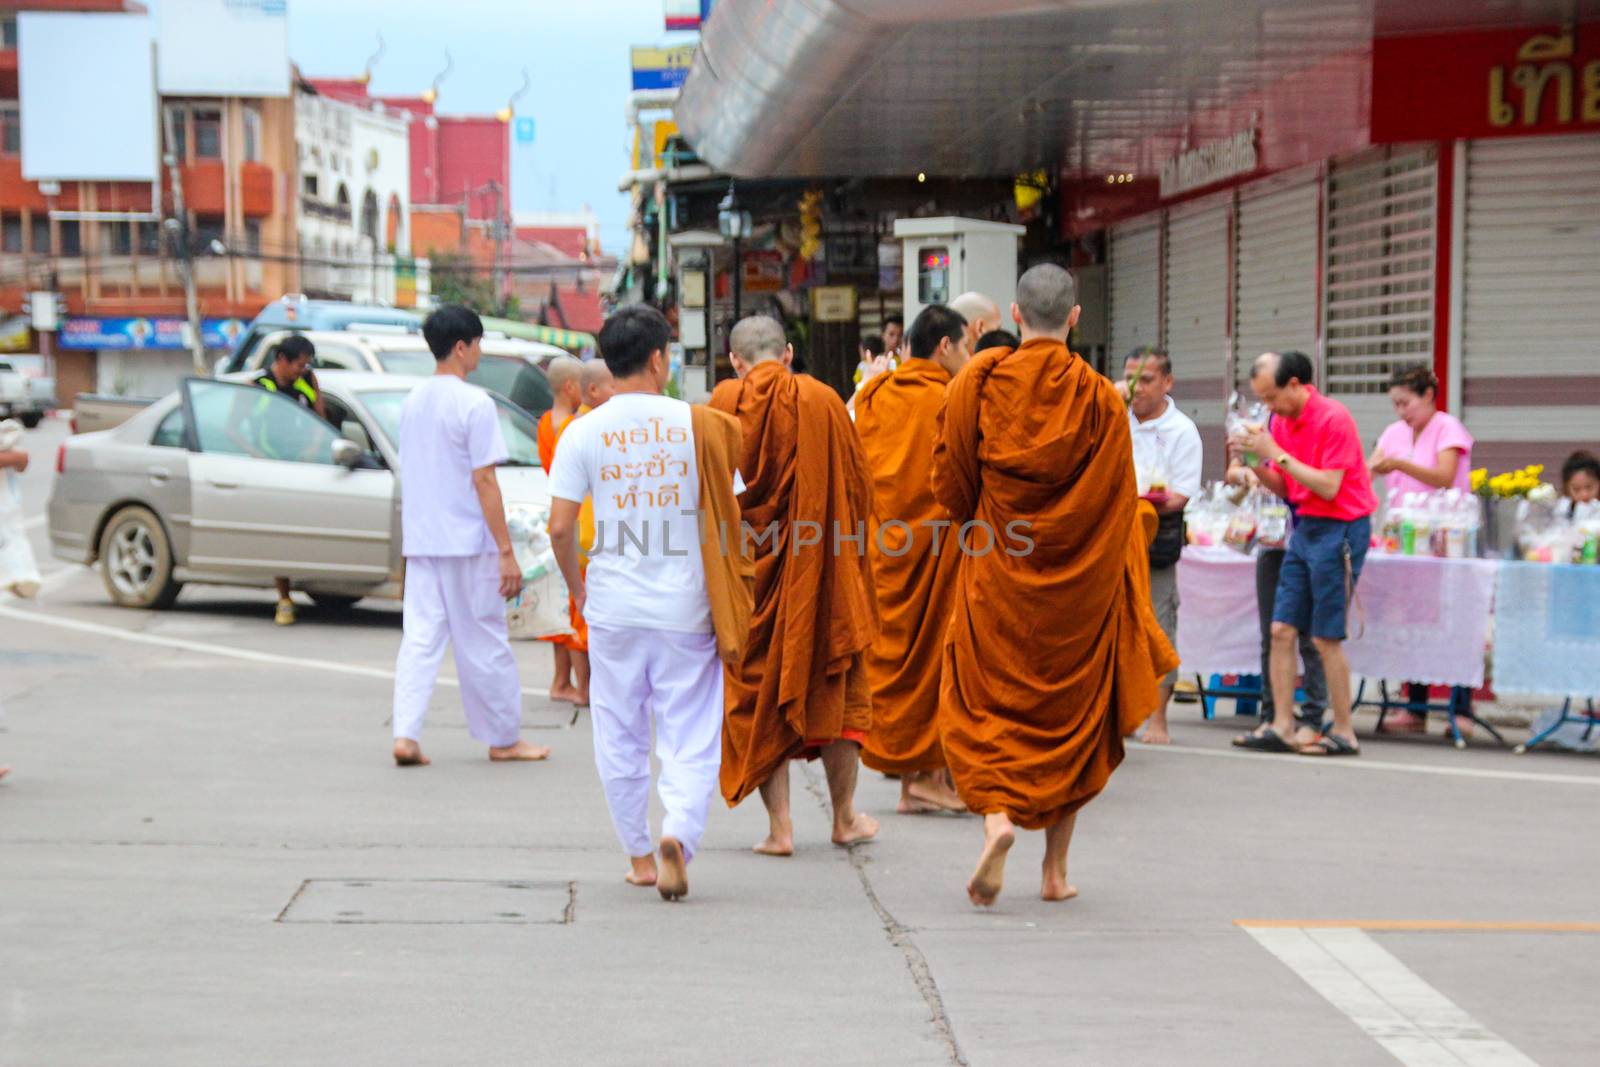 NAN,THAILAND - JULY 19,2016  : The monk walked alms in the morning.